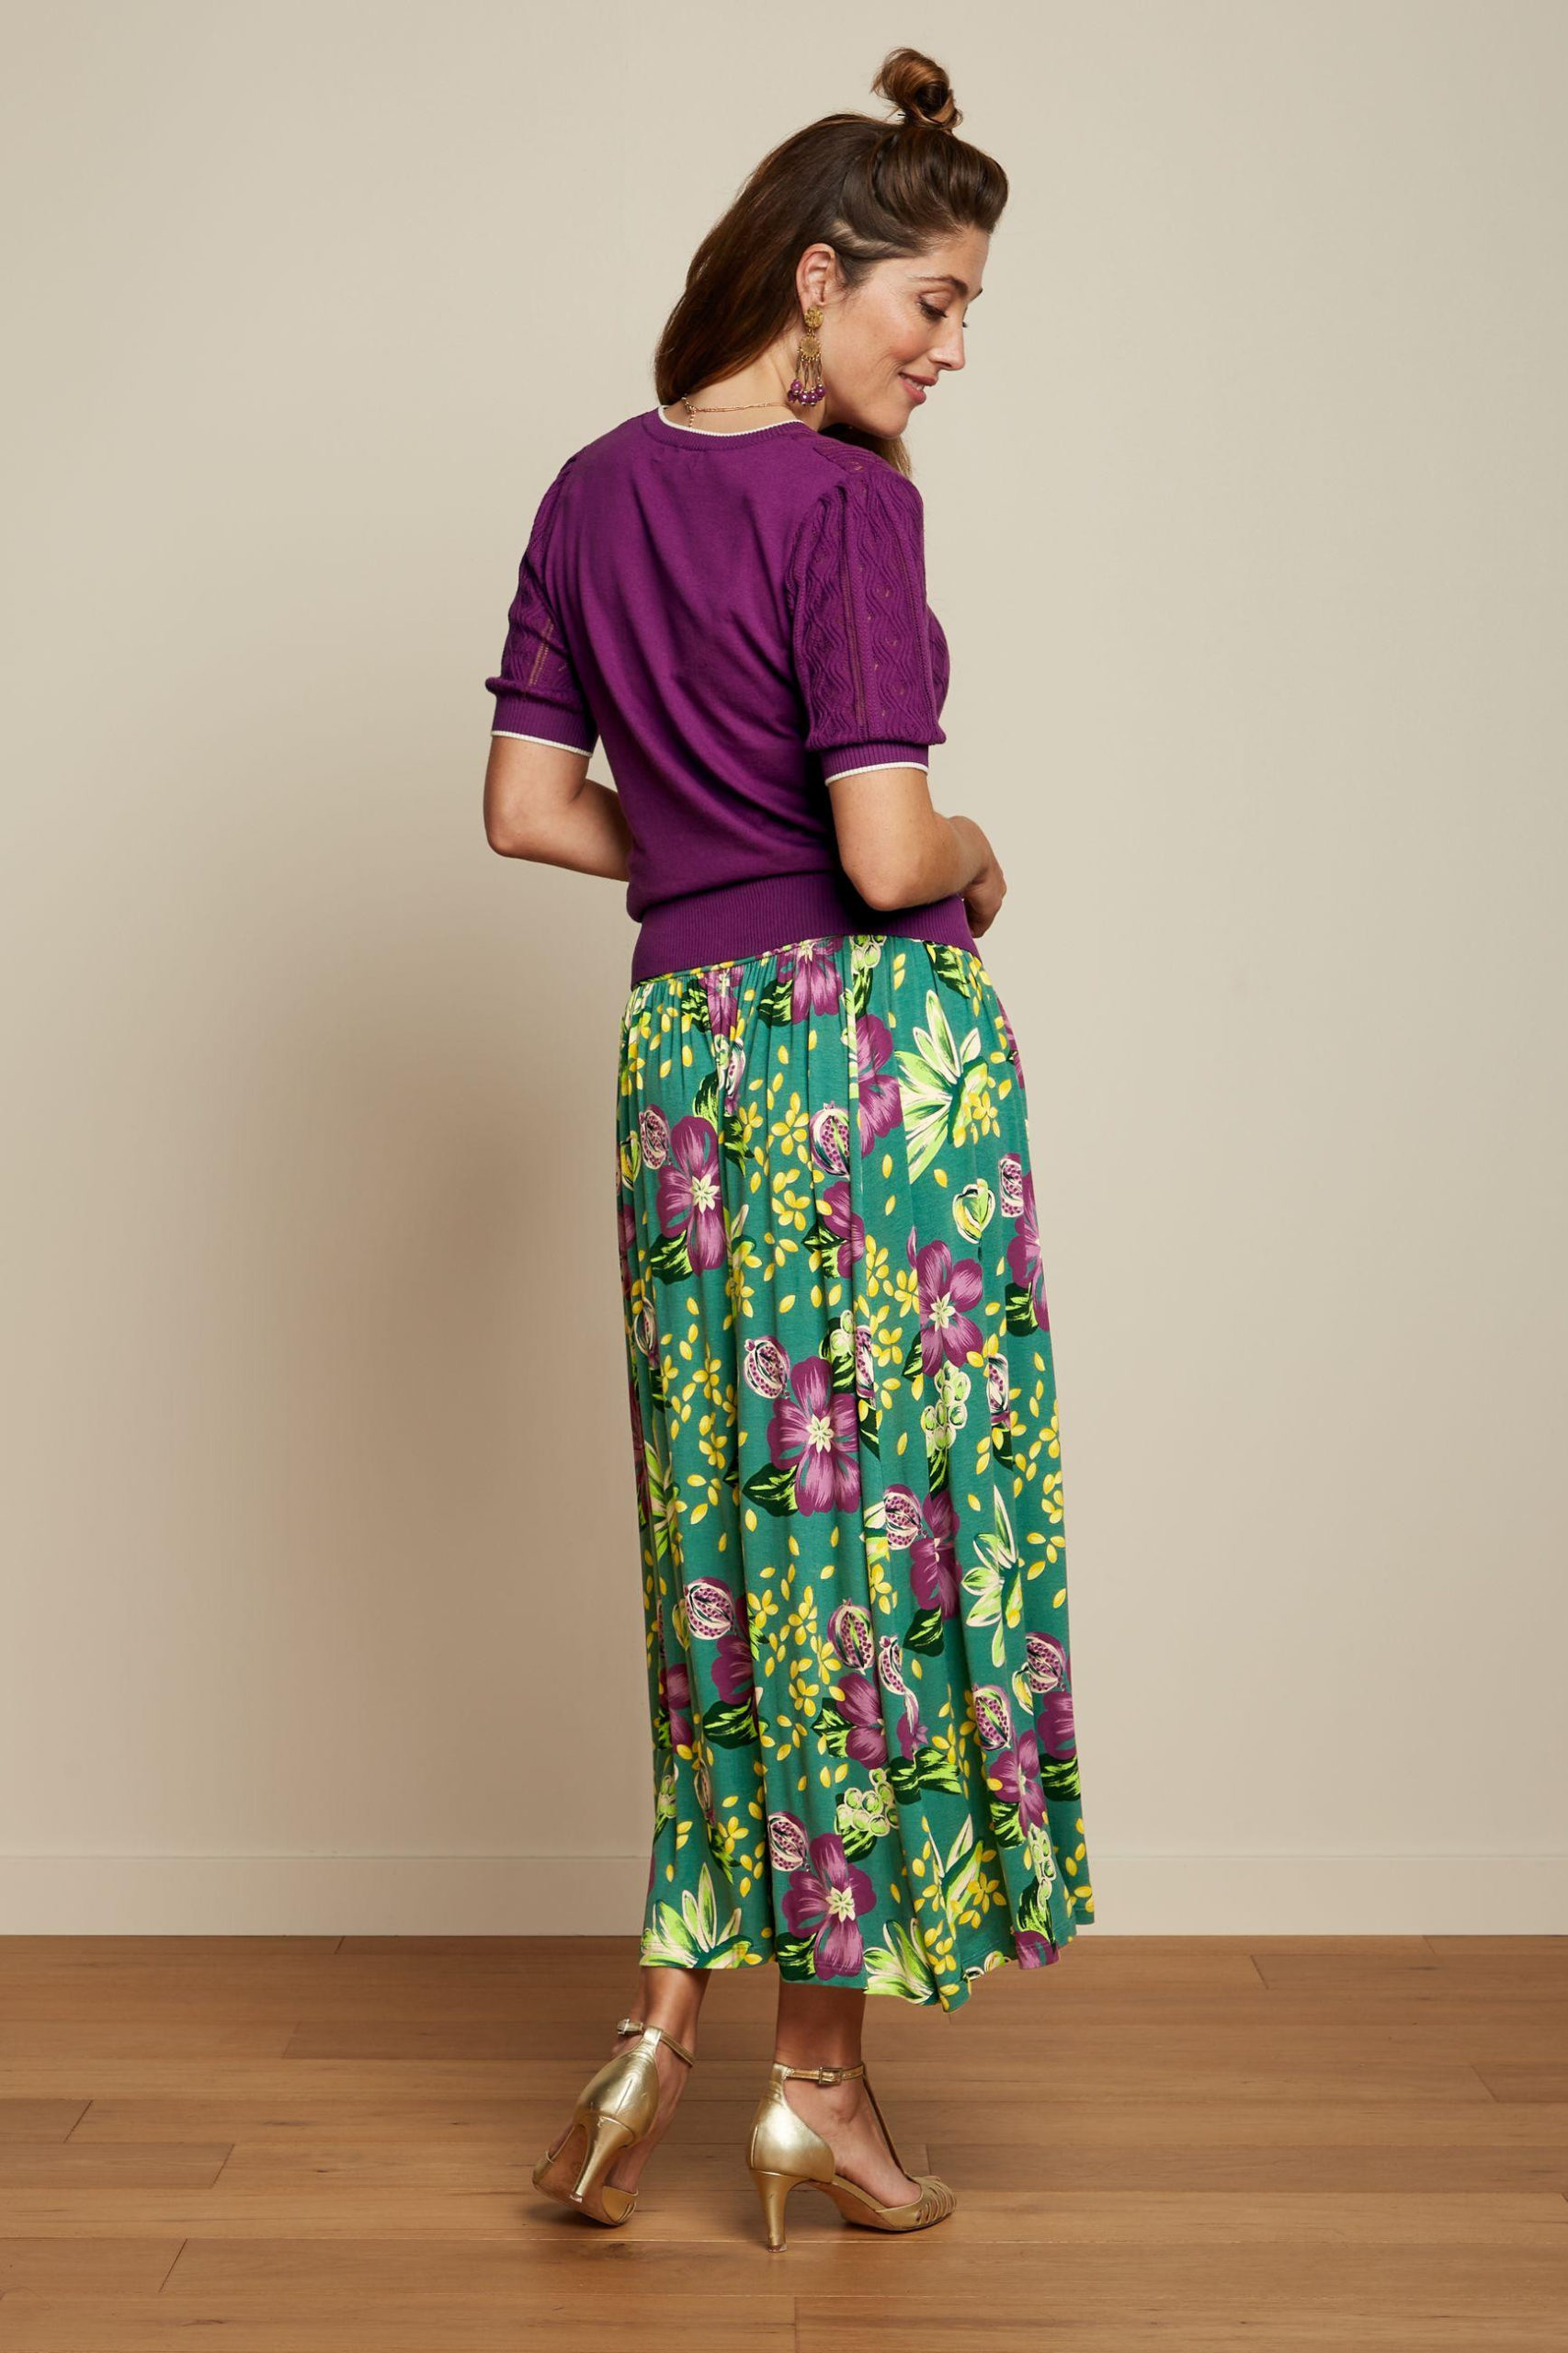 Agnes Puff Top Herrero purple with green floral skirt back